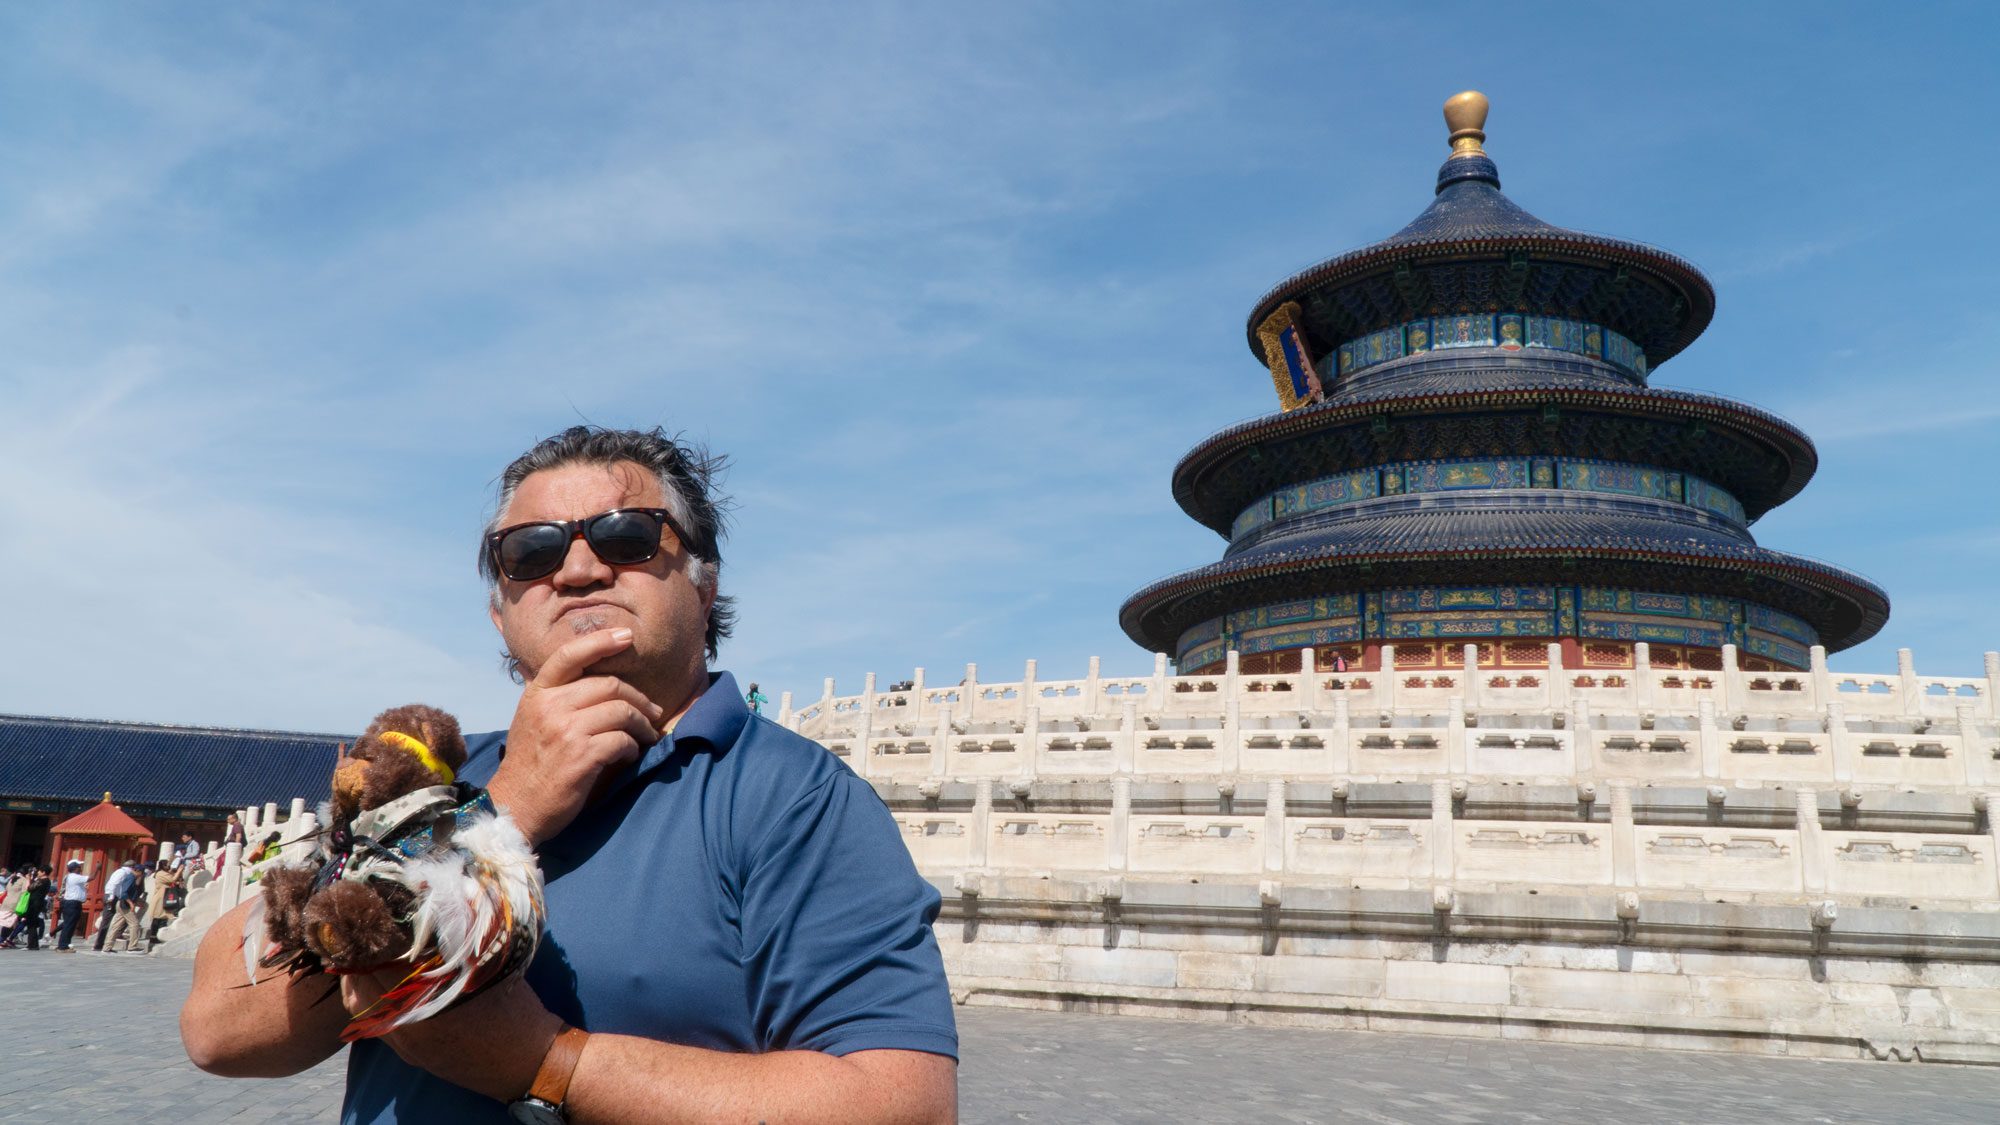 Pio Terei in front of the Forbidden City, China